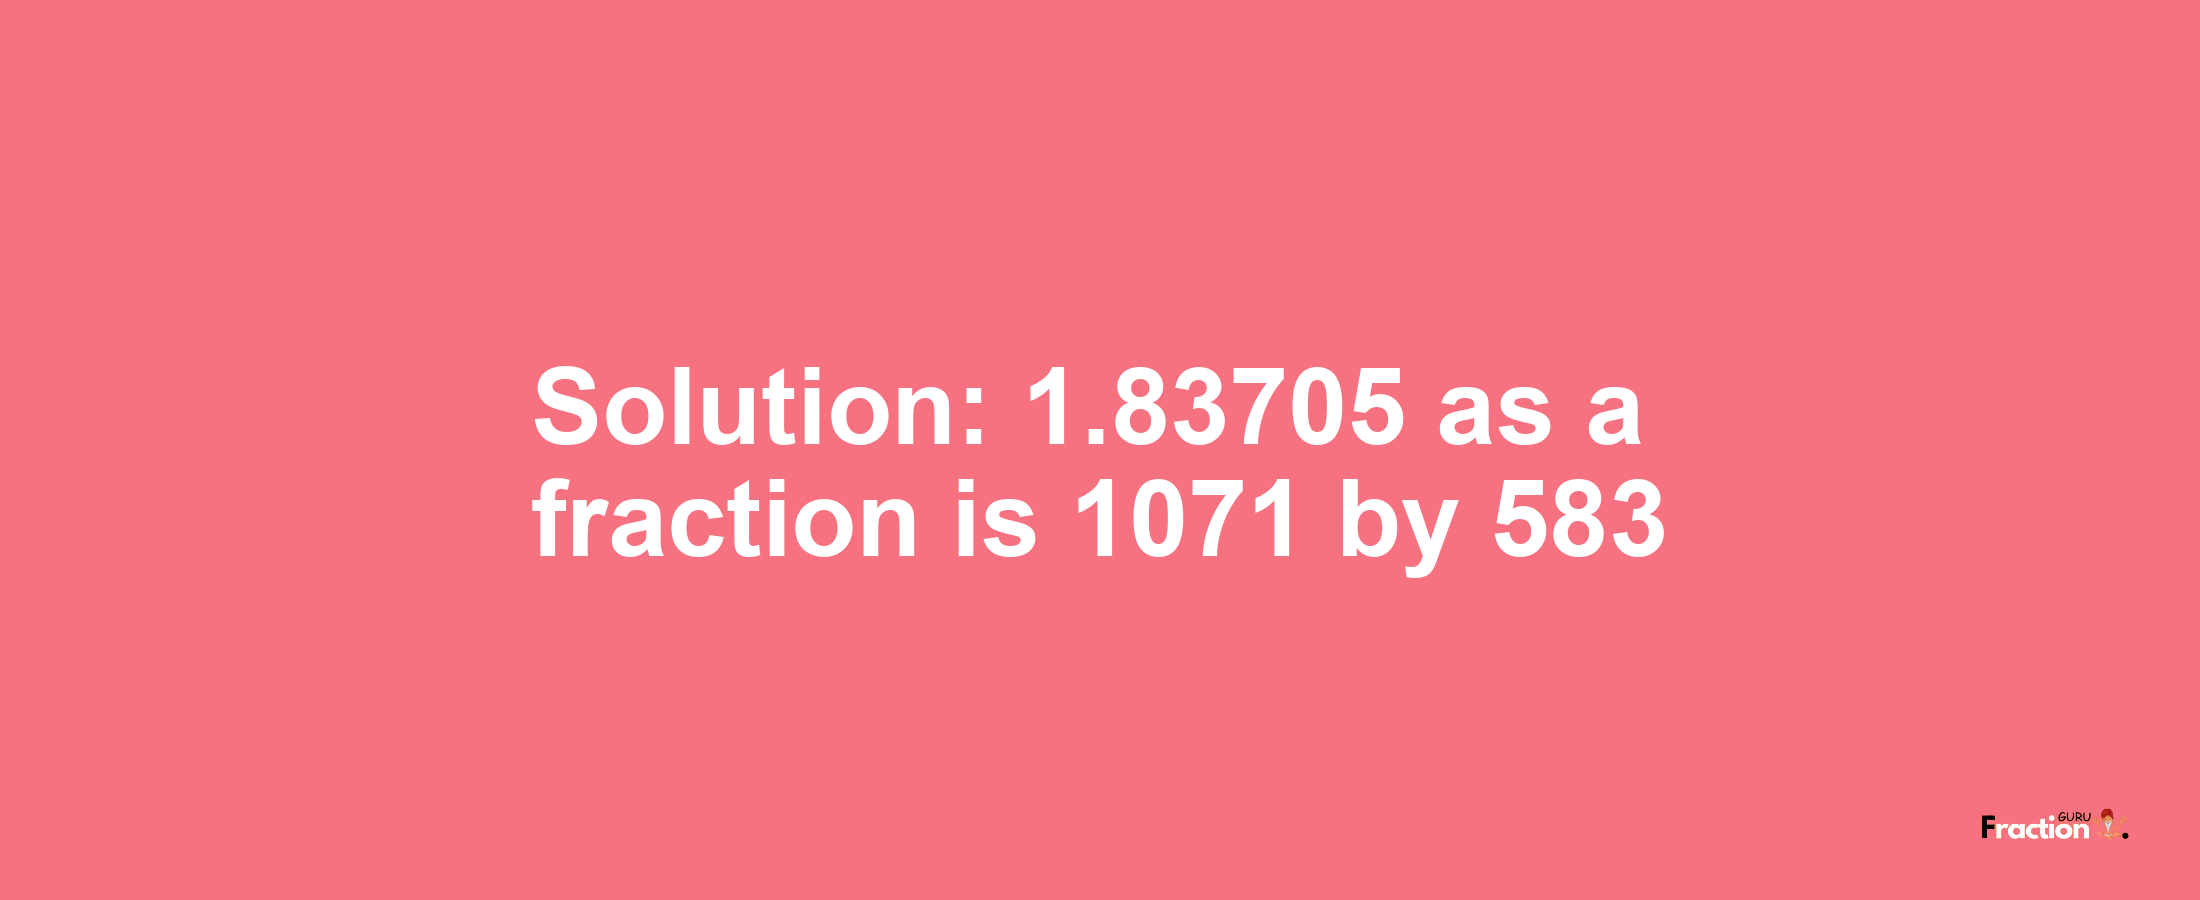 Solution:1.83705 as a fraction is 1071/583